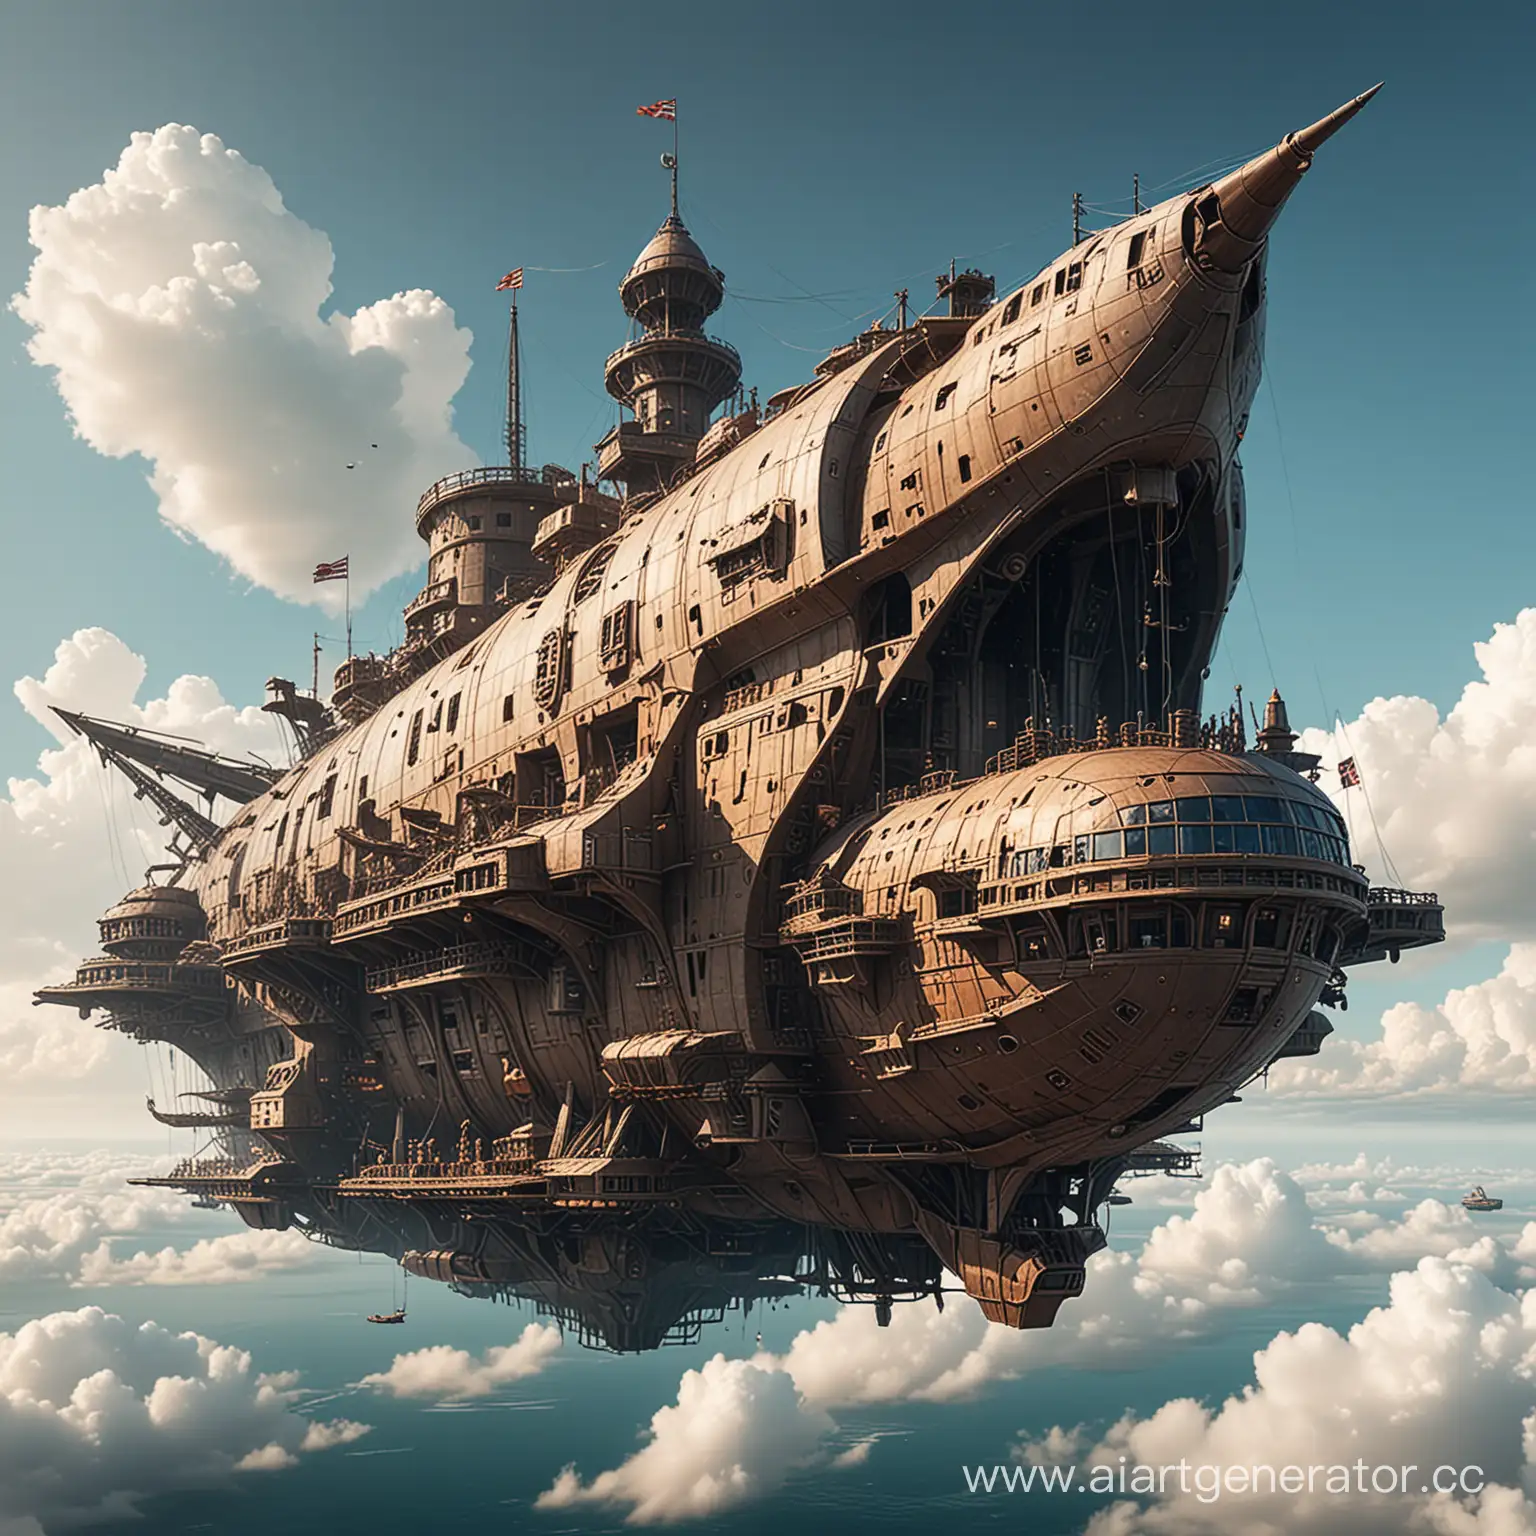 Fantasy-Air-Fortress-Ship-Majestic-Vessel-Soaring-in-Mythical-Skies